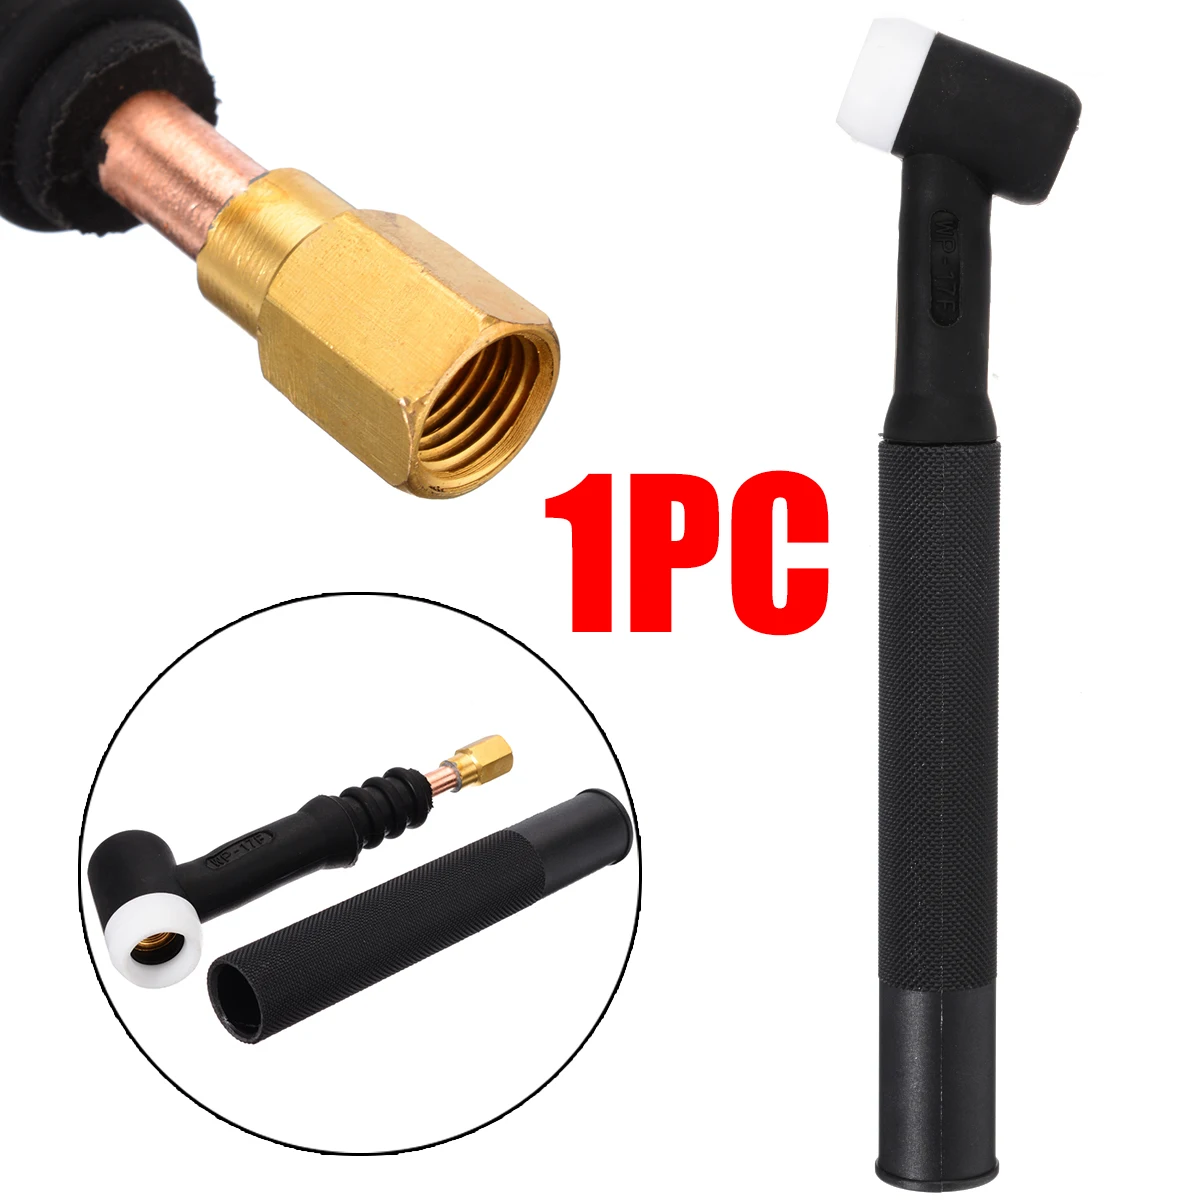 1pc New Practical 150A WP-17F TIG Welding Torch Head Body Flexible Air-Cooled With Handle Welding Tool Supporting Equipment